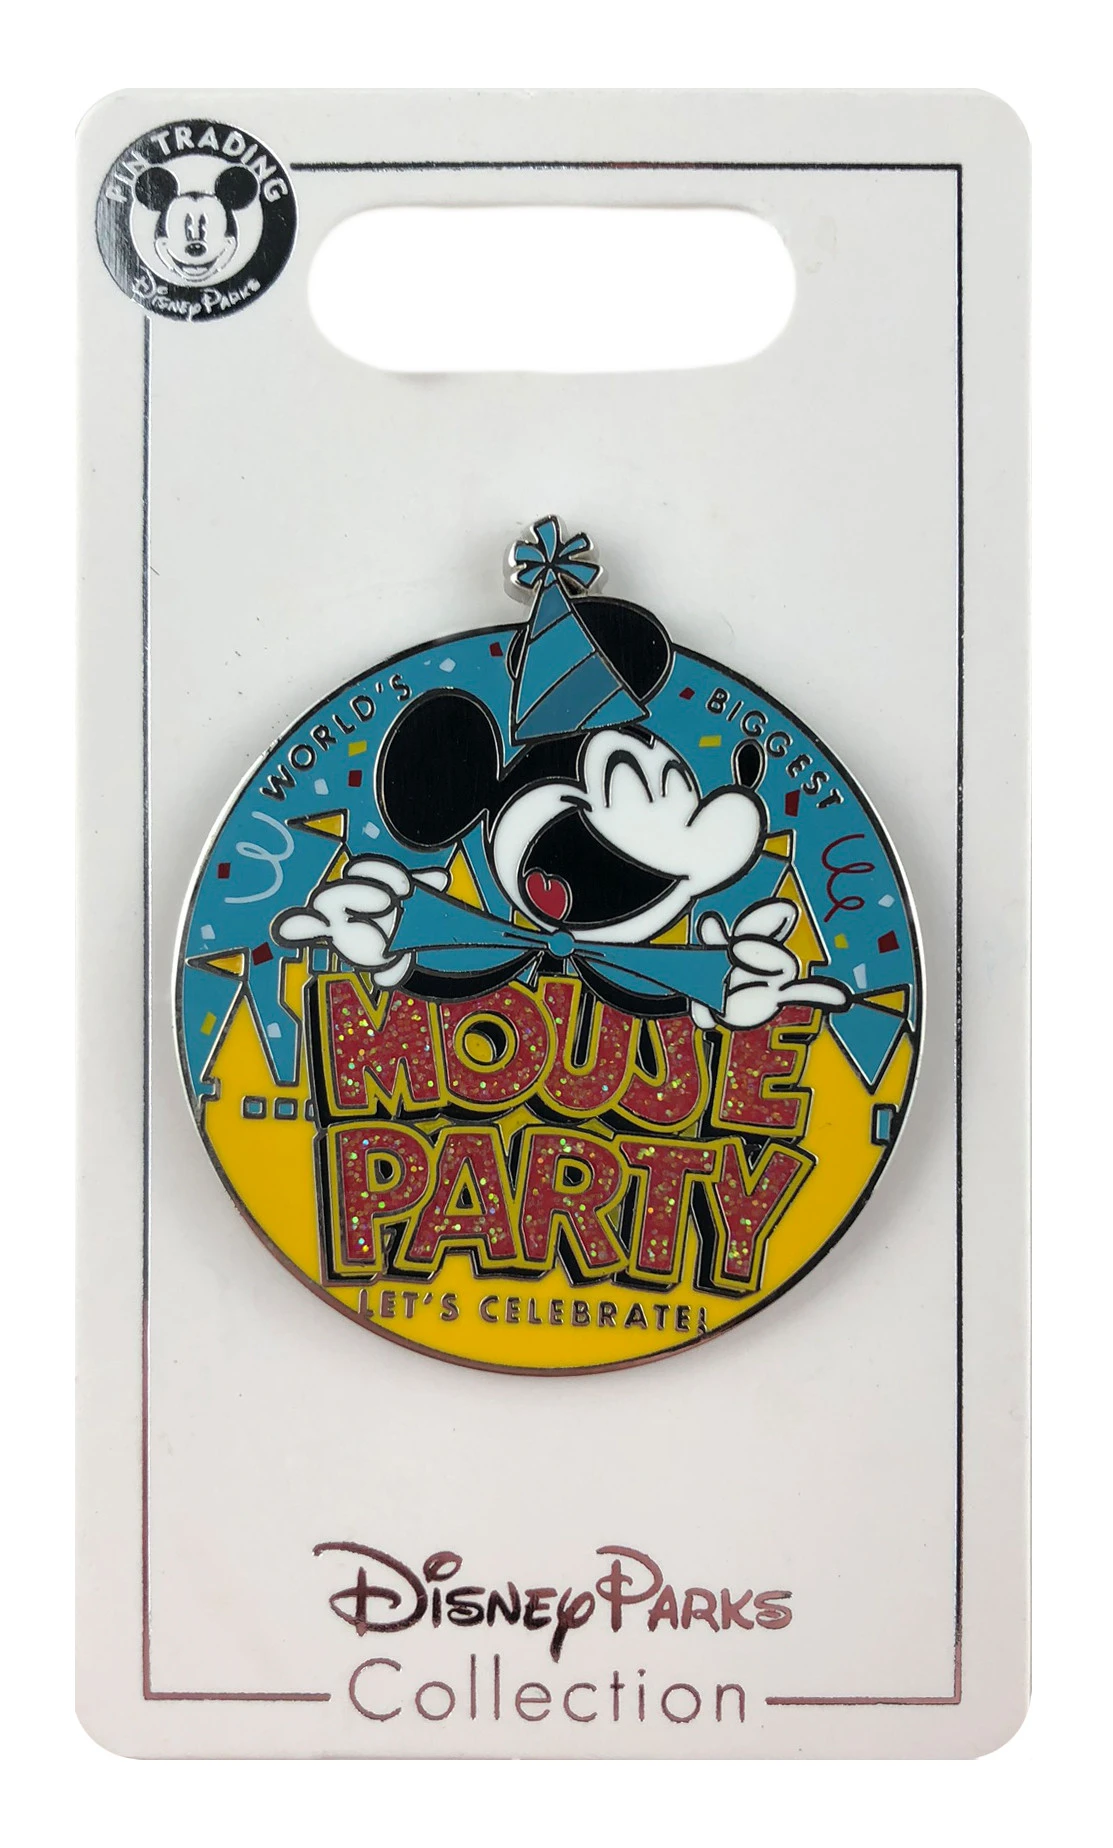 item Disney Pin - World's Biggest Mouse Party - Let's Celebrate 135037